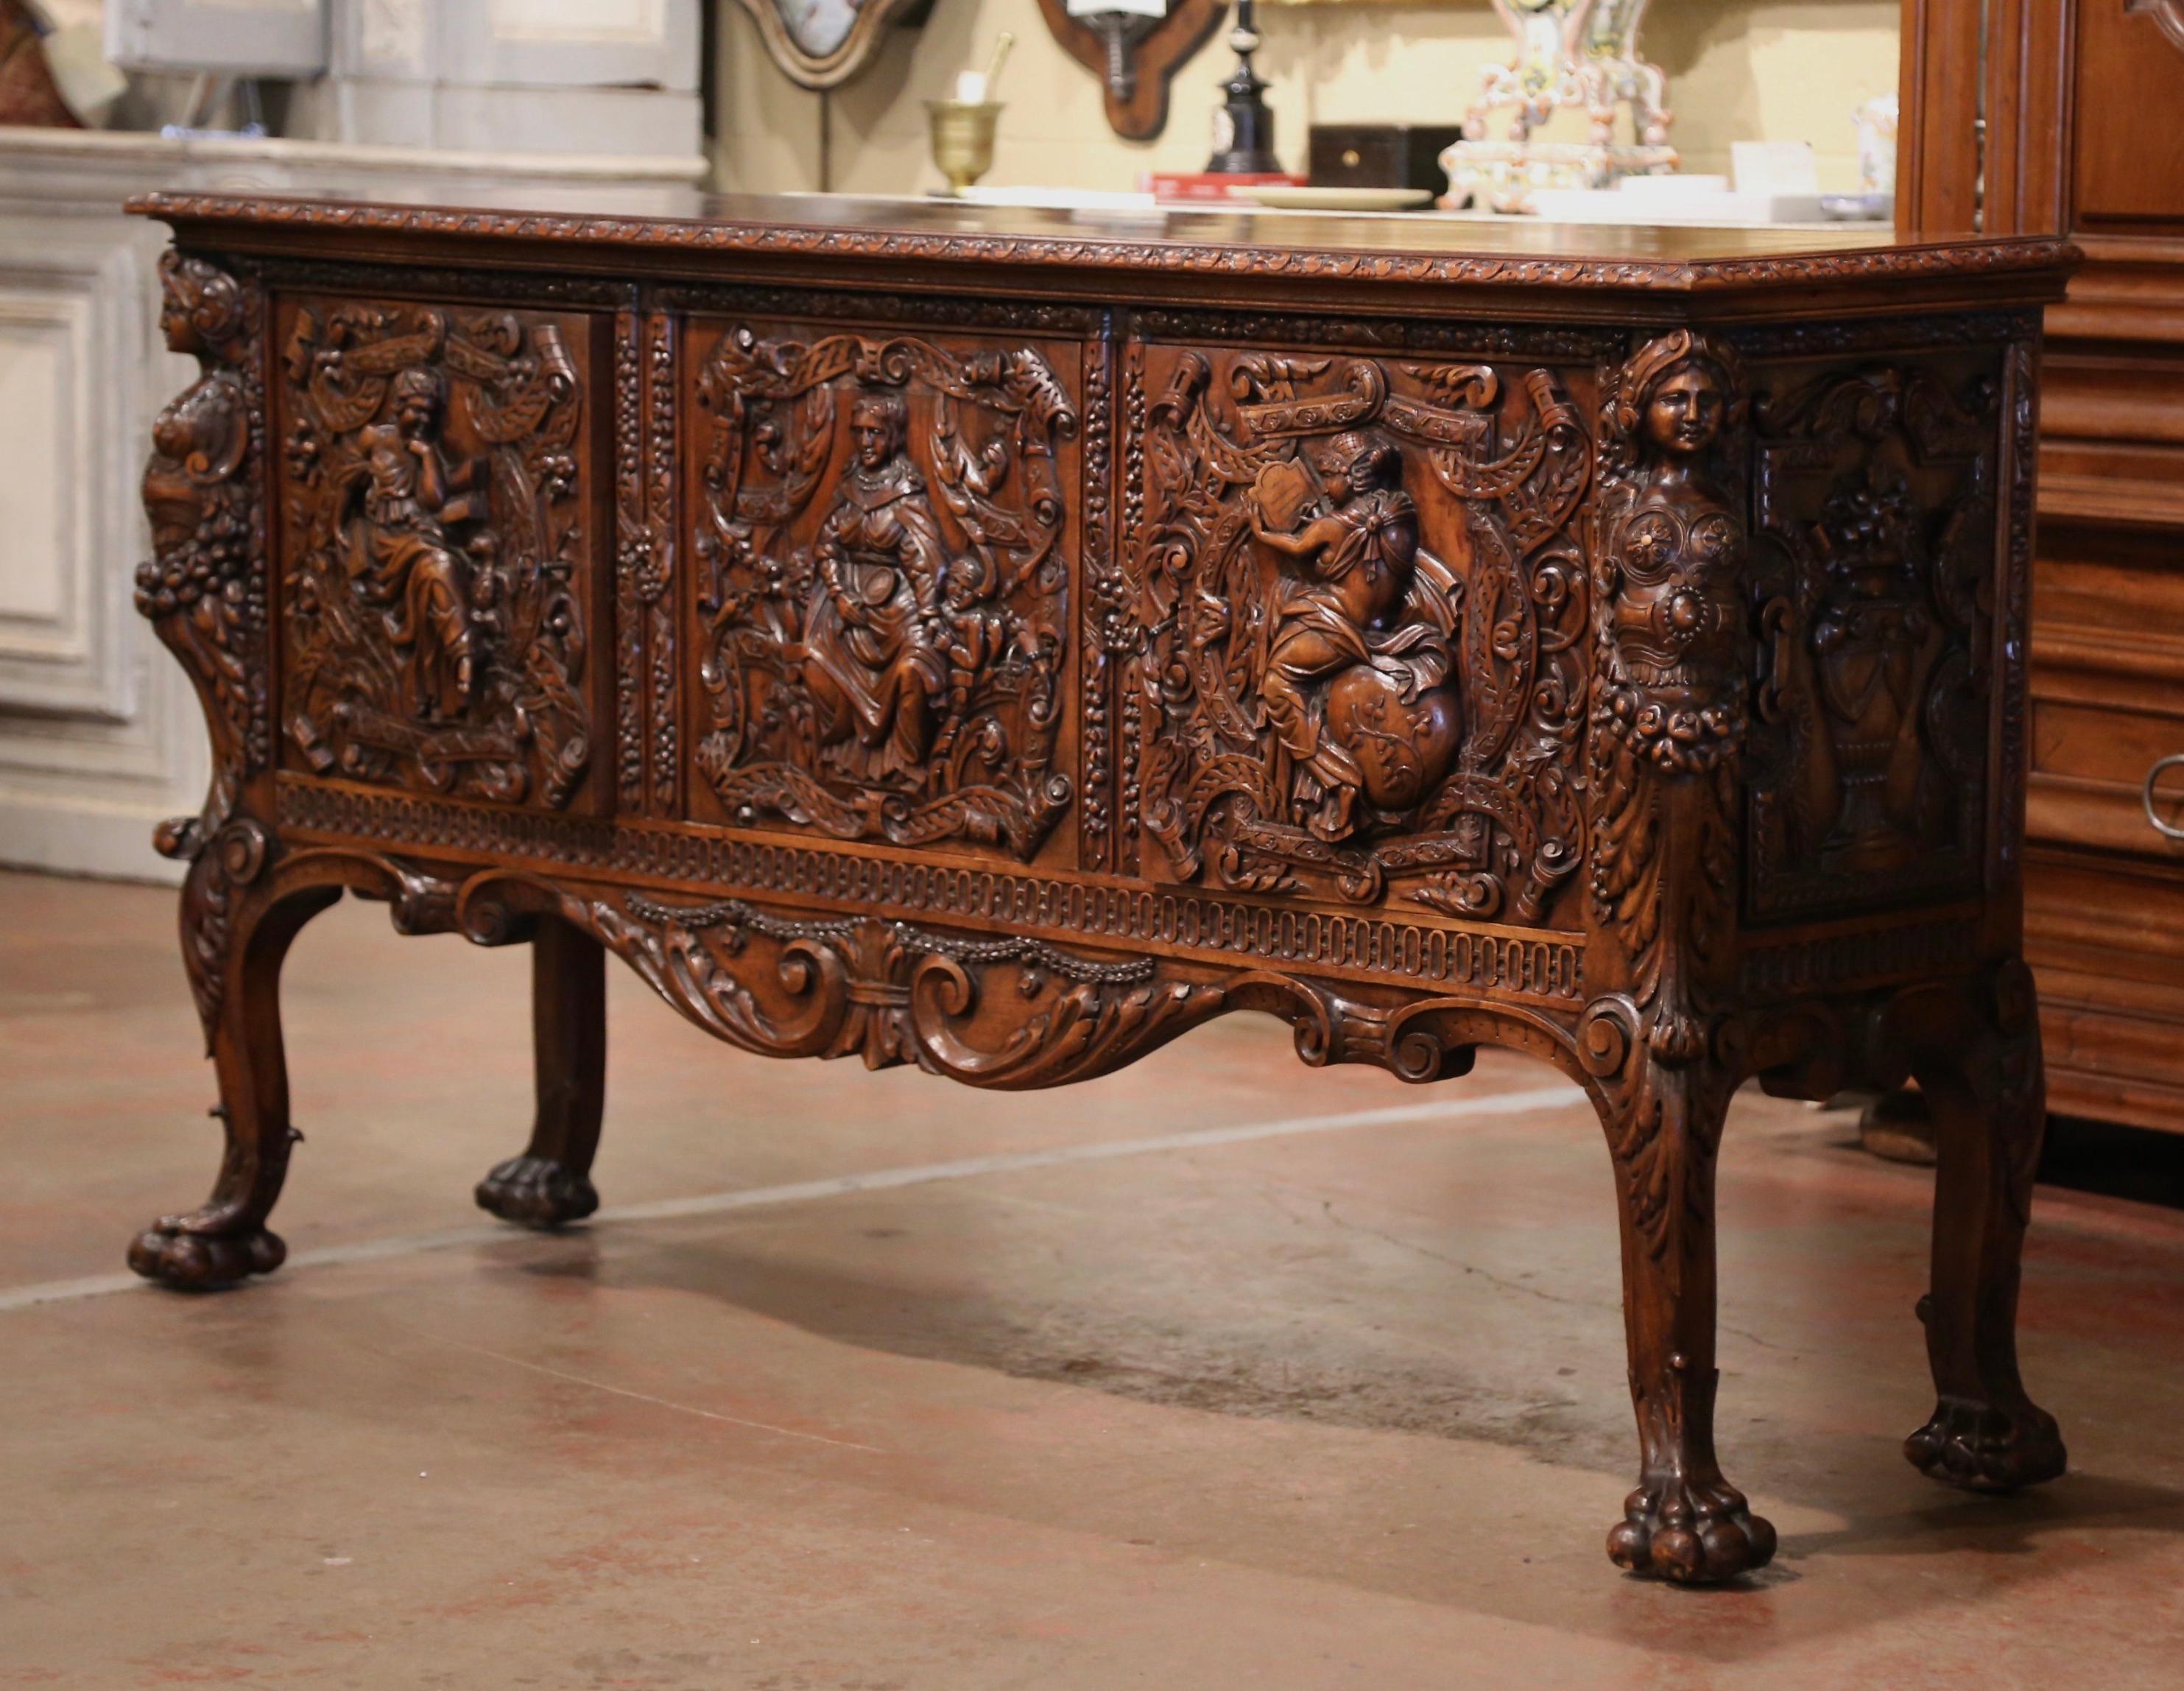 This heavily carved credenza was created in Italy circa 1870. Built of solid walnut, the buffet stands on elegant cabriole legs decorated with acanthus leaves at the shoulders, and ending with paw feet. The cabinet features three doors across the